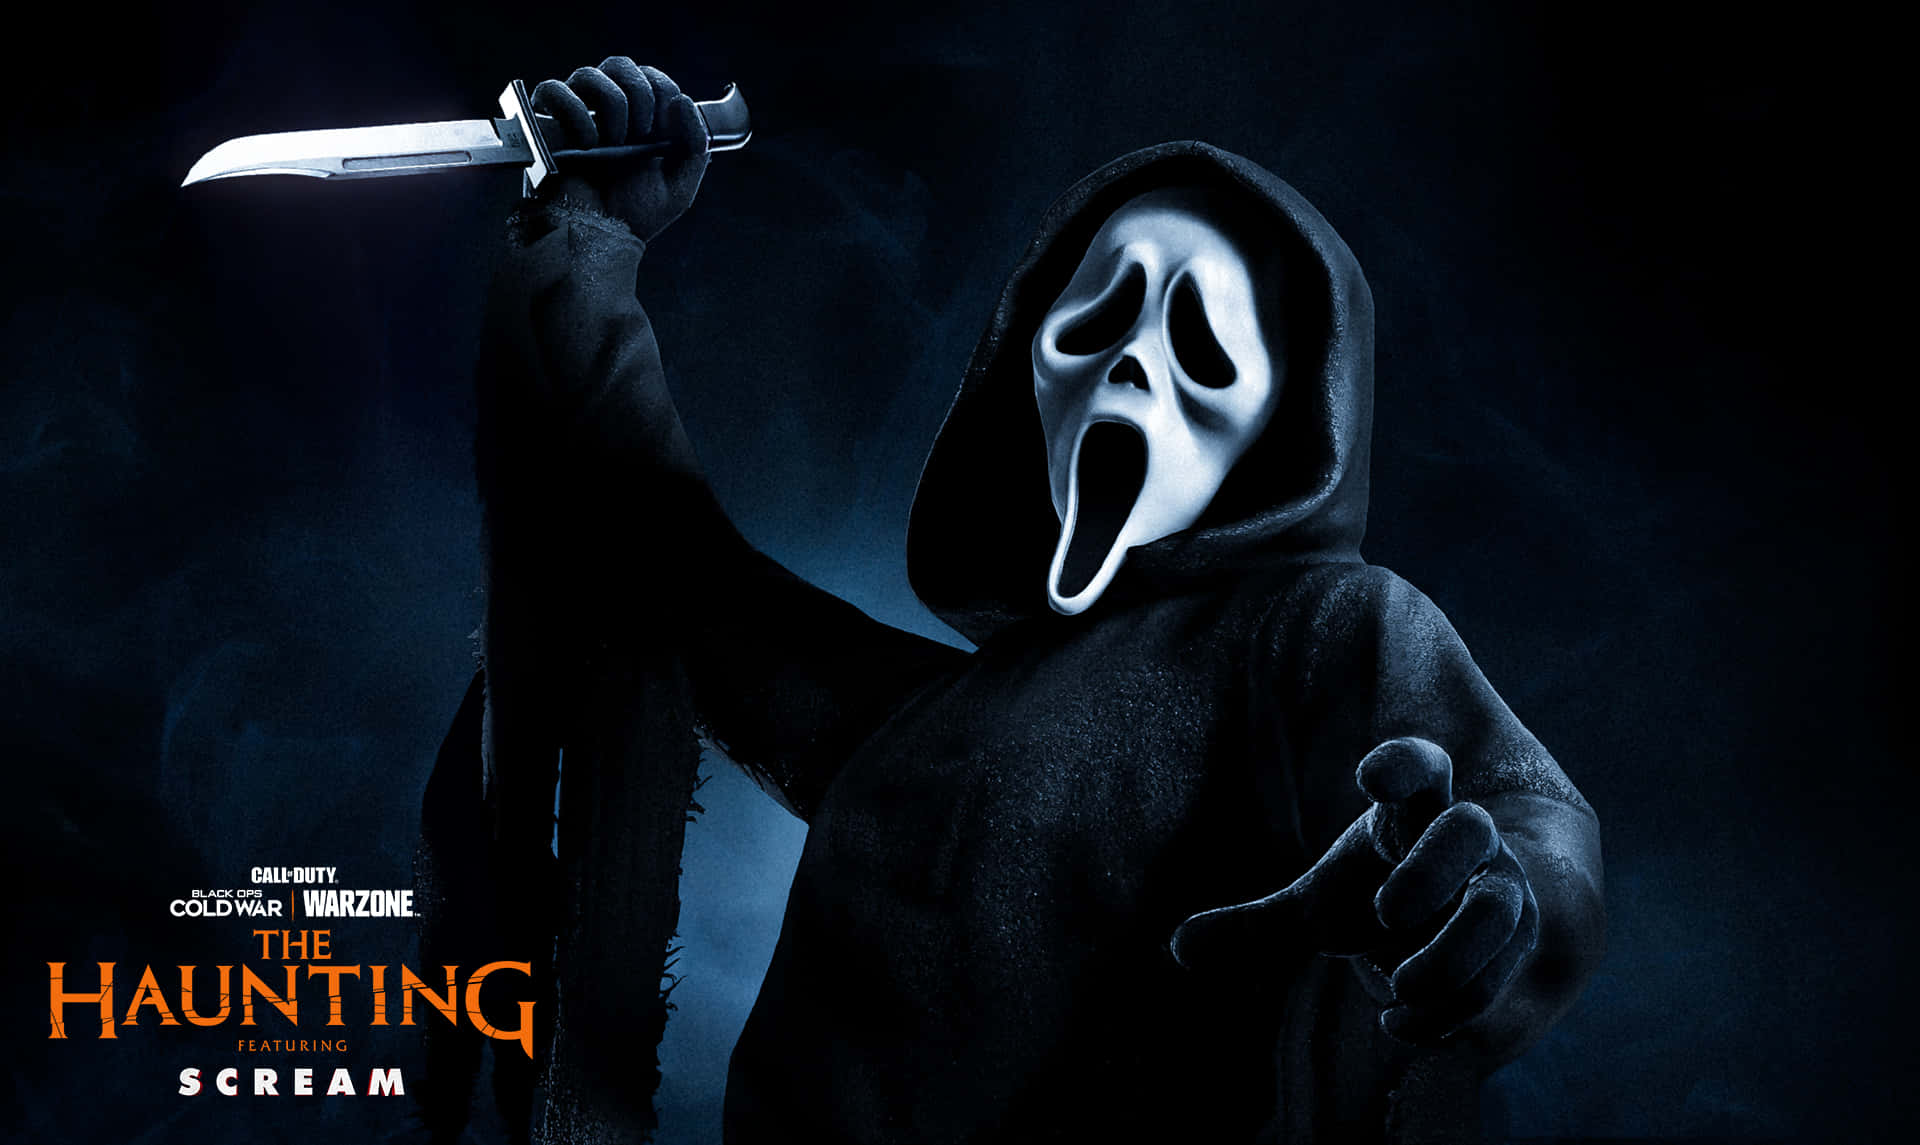 Screaming Scream Poster With A Knife